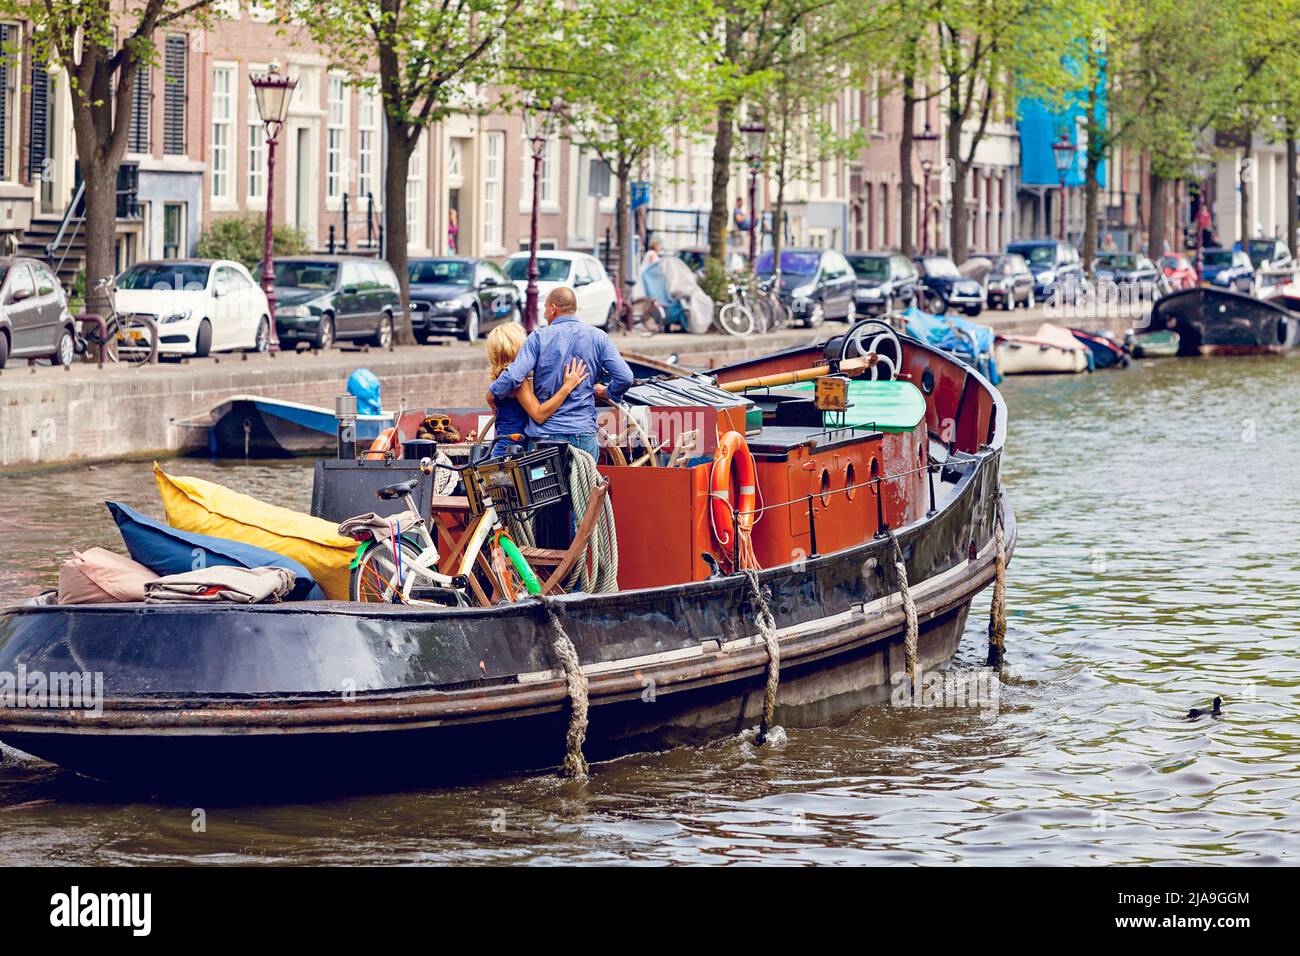 man and woman, couple, embrace travelling in a barge, boat, along a tree lined Amsterdam city canal. Stock Photo